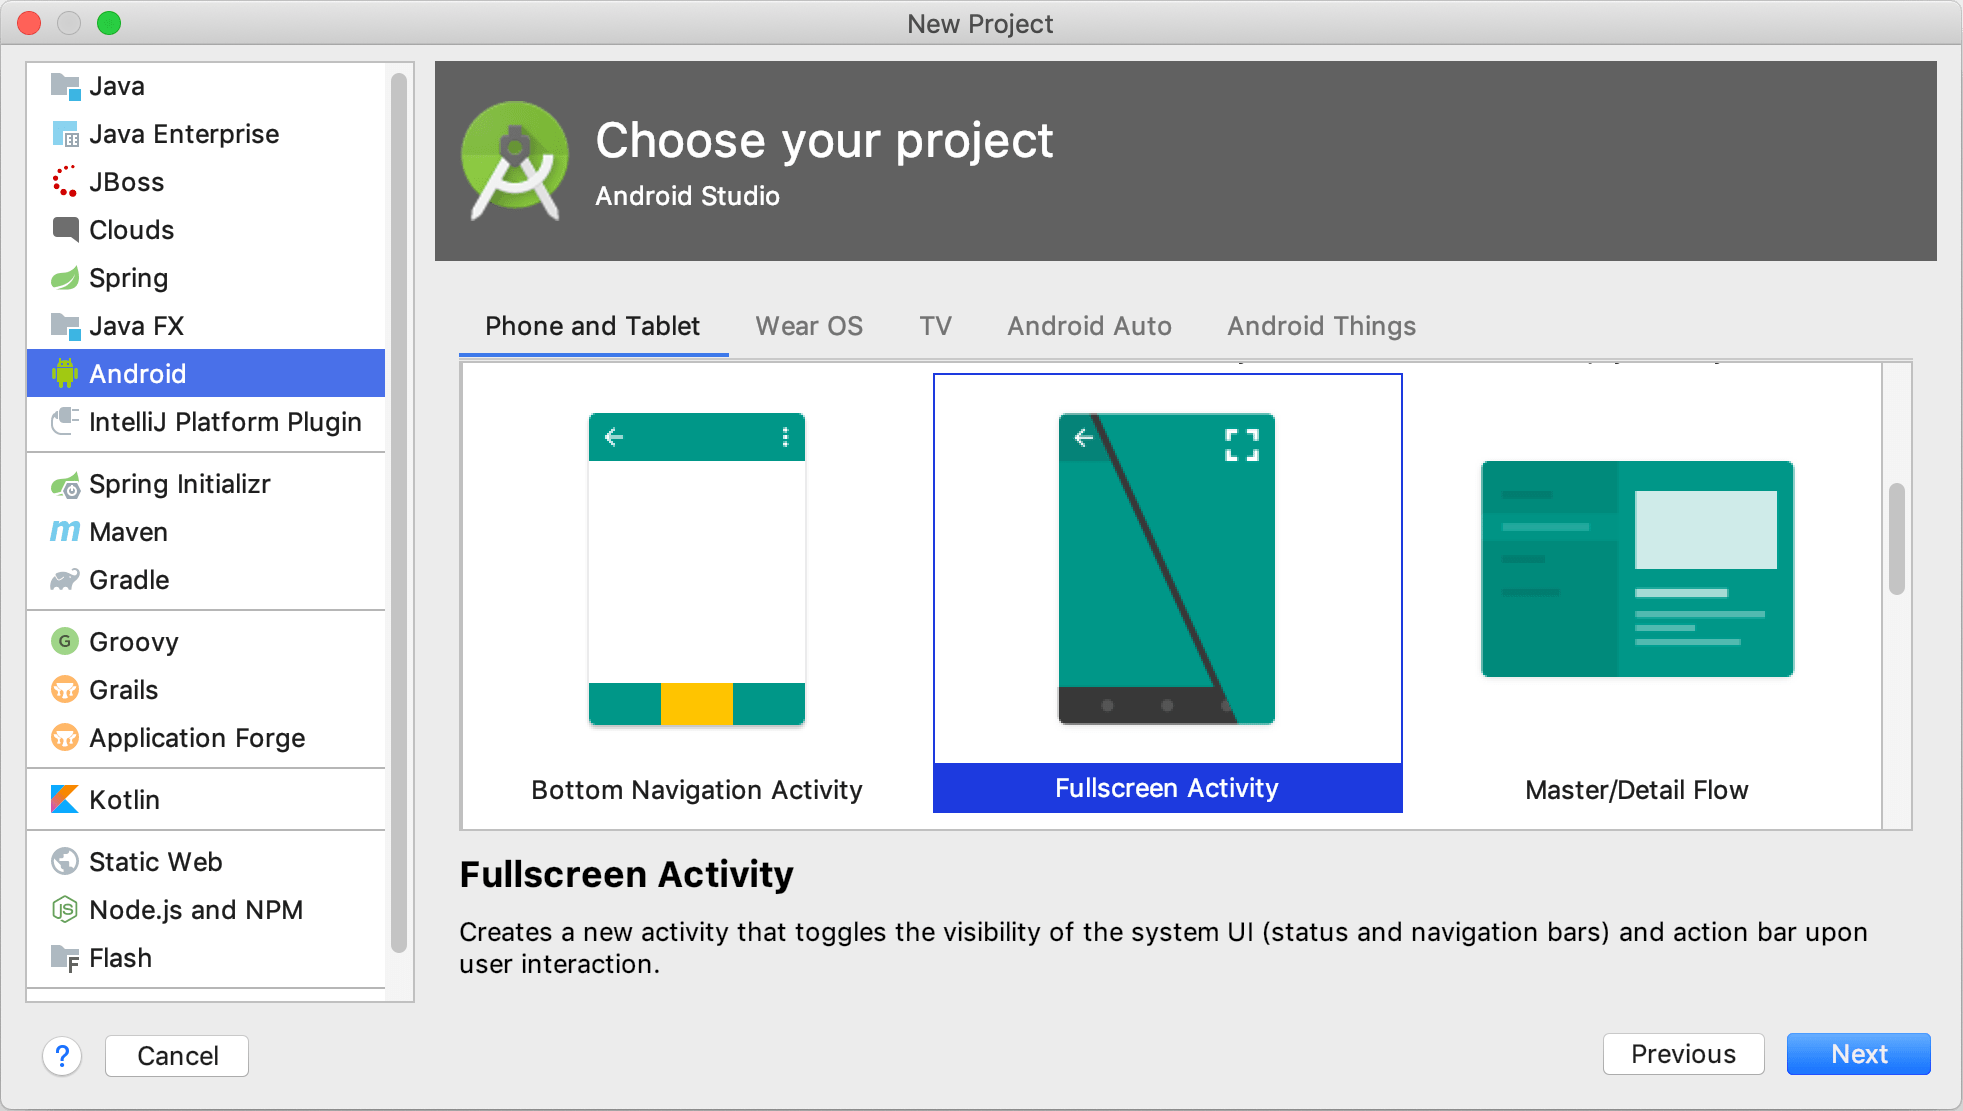 Creating a new Android project